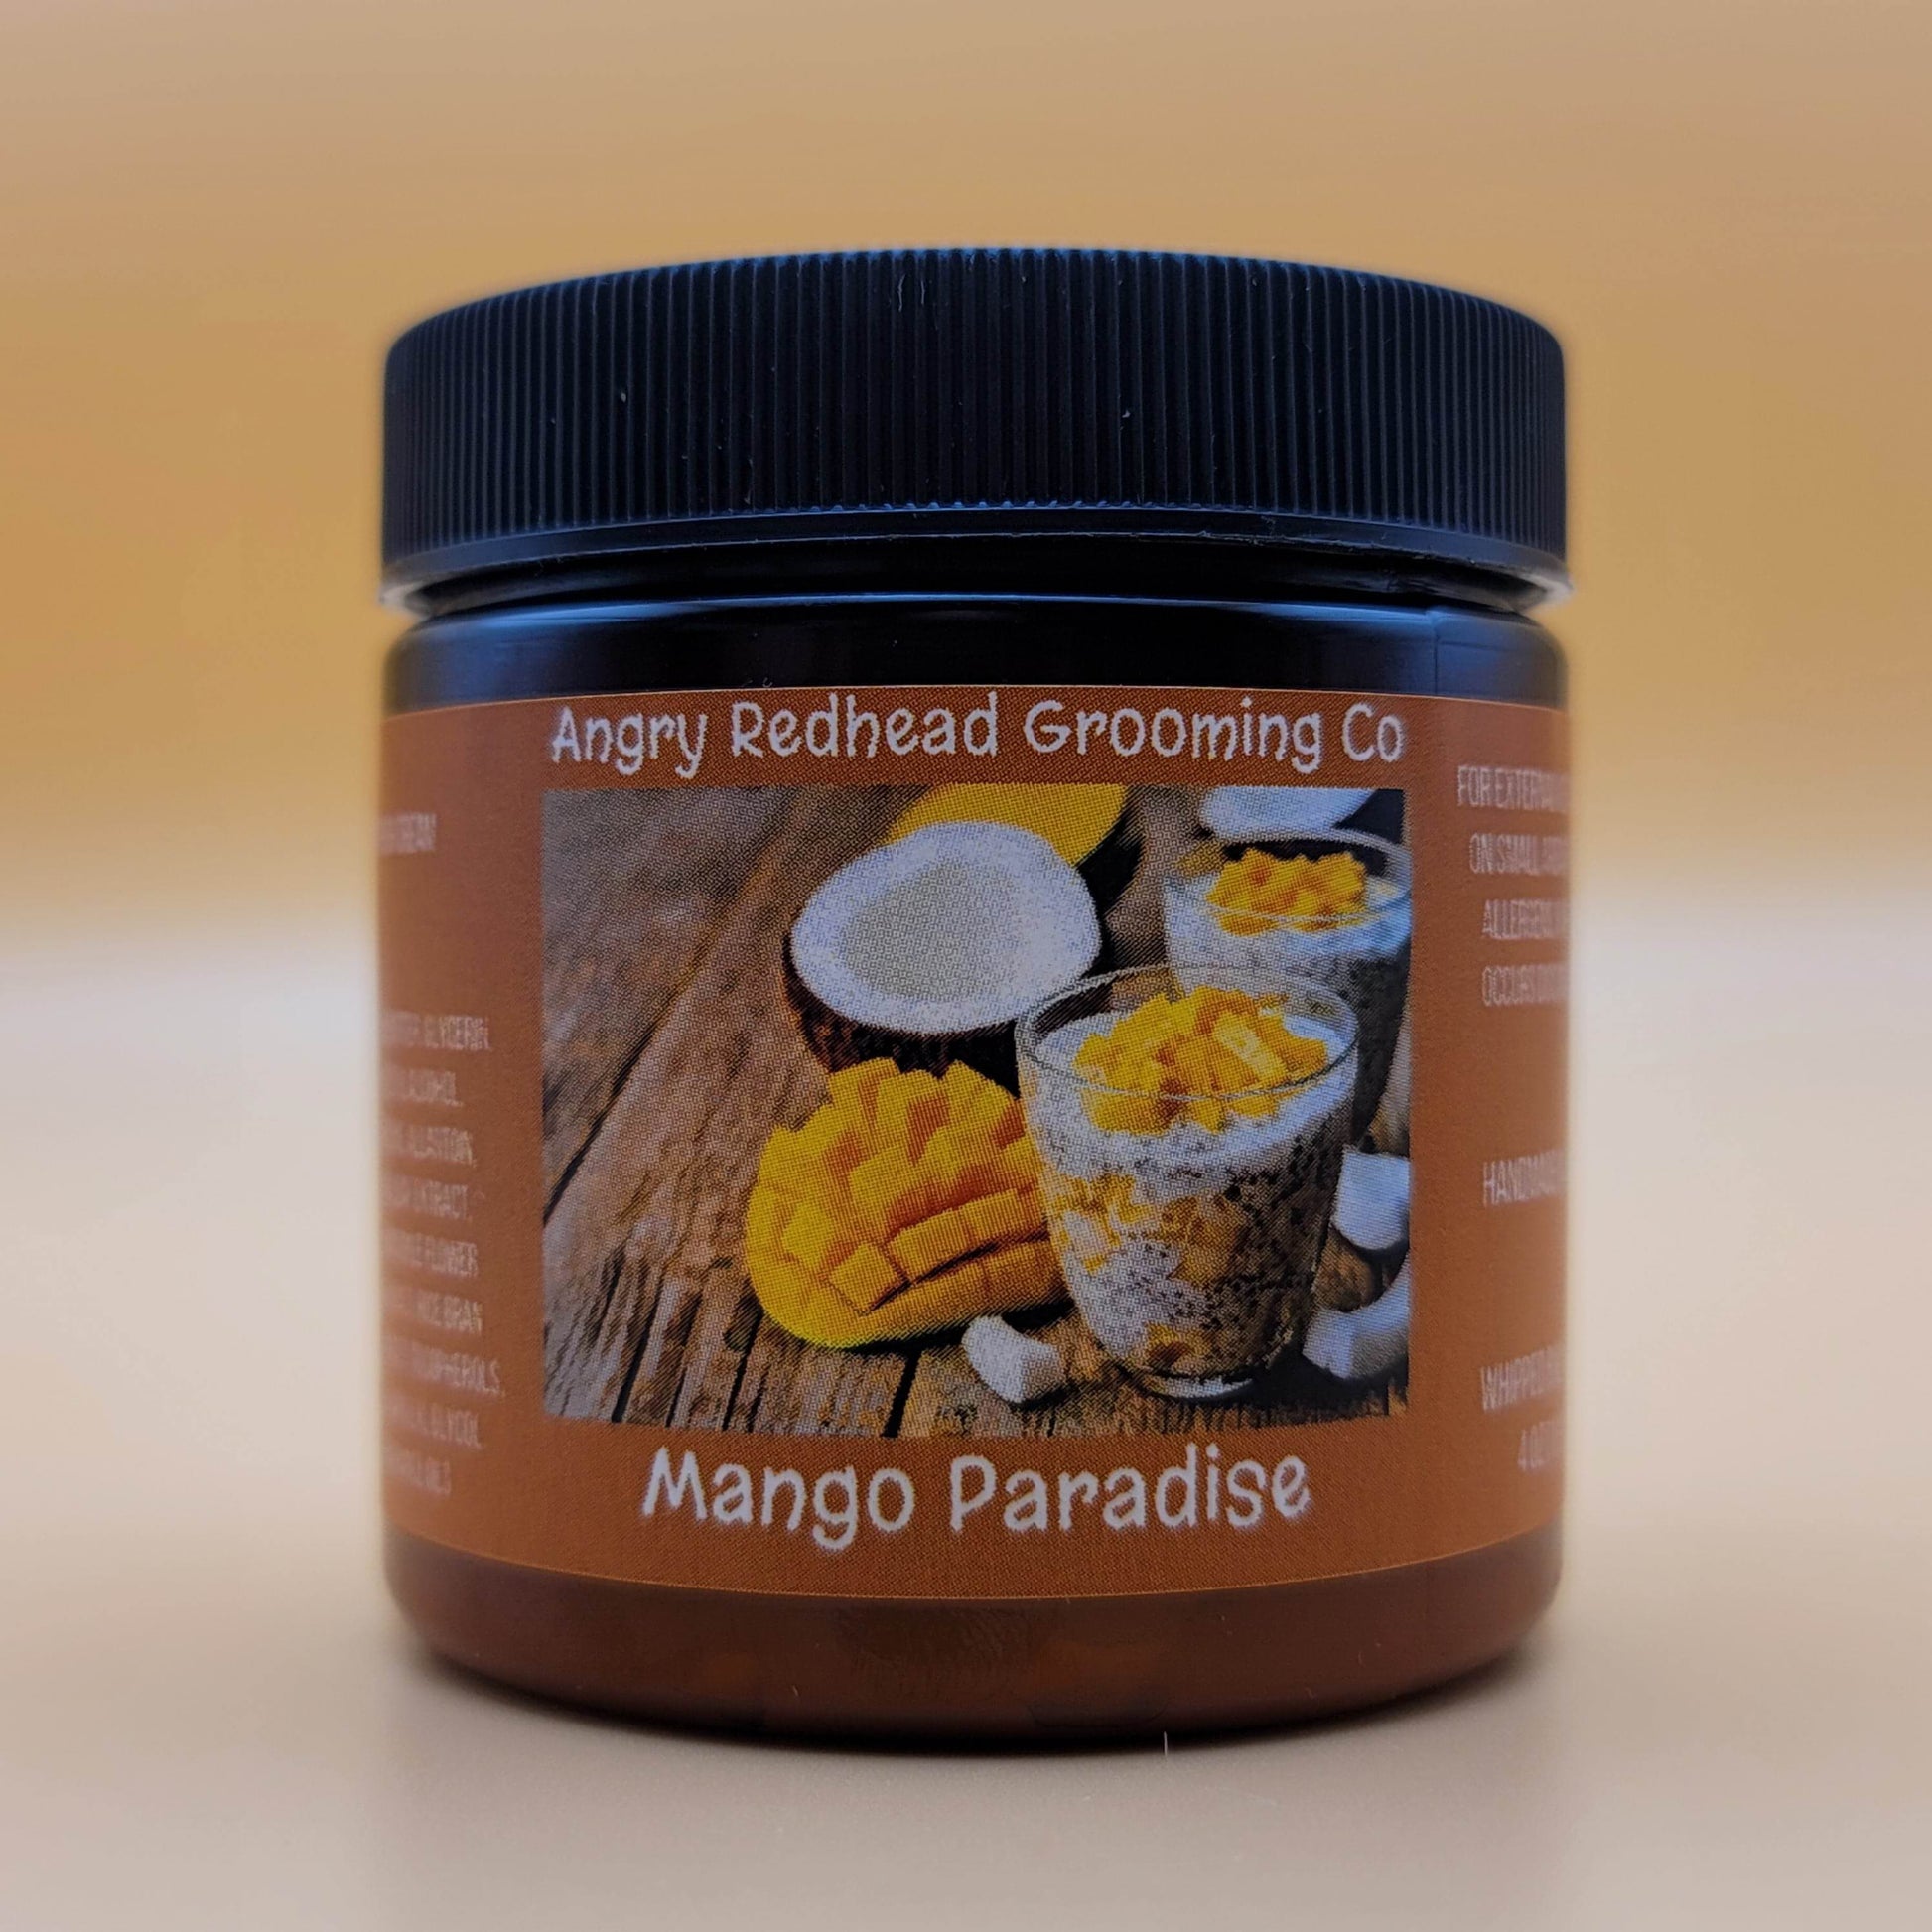 Mango Paradise Whipped Body Butter by Angry Redhead Grooming Co - angryredheadgrooming.com